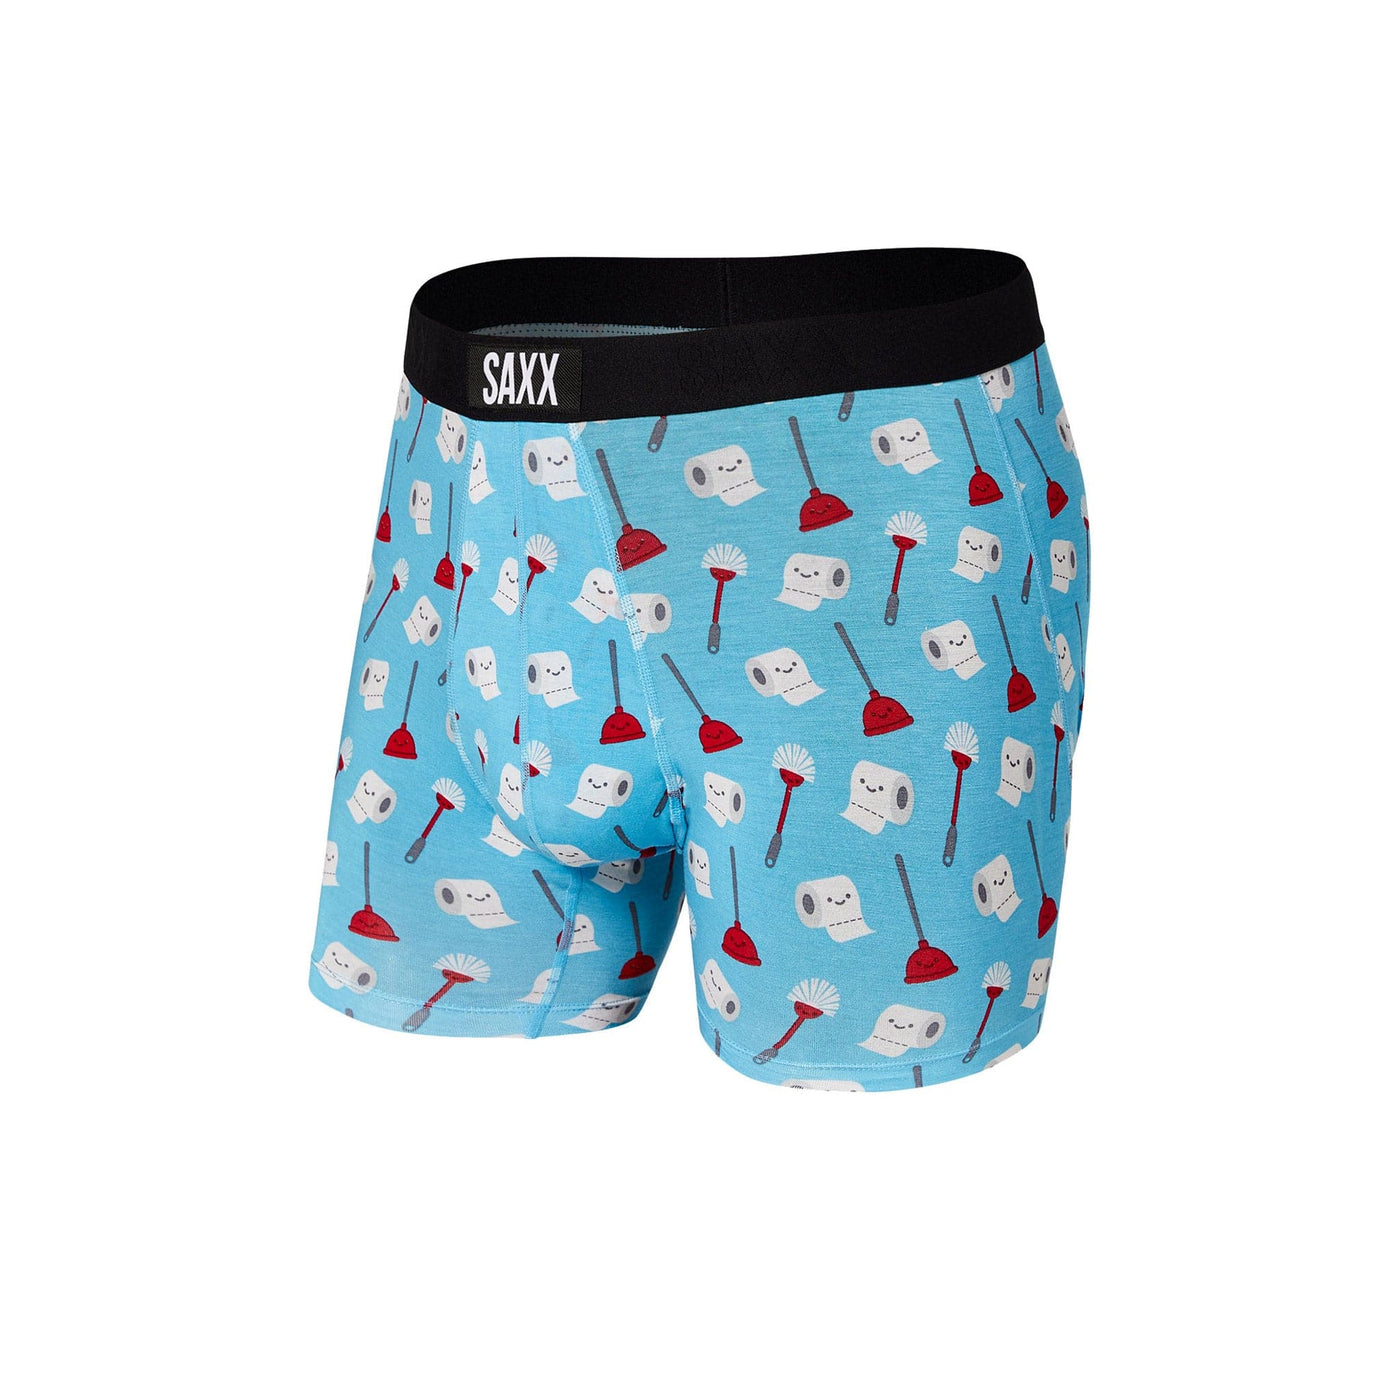 Saxx Vibe Boxers - Love What You Doo